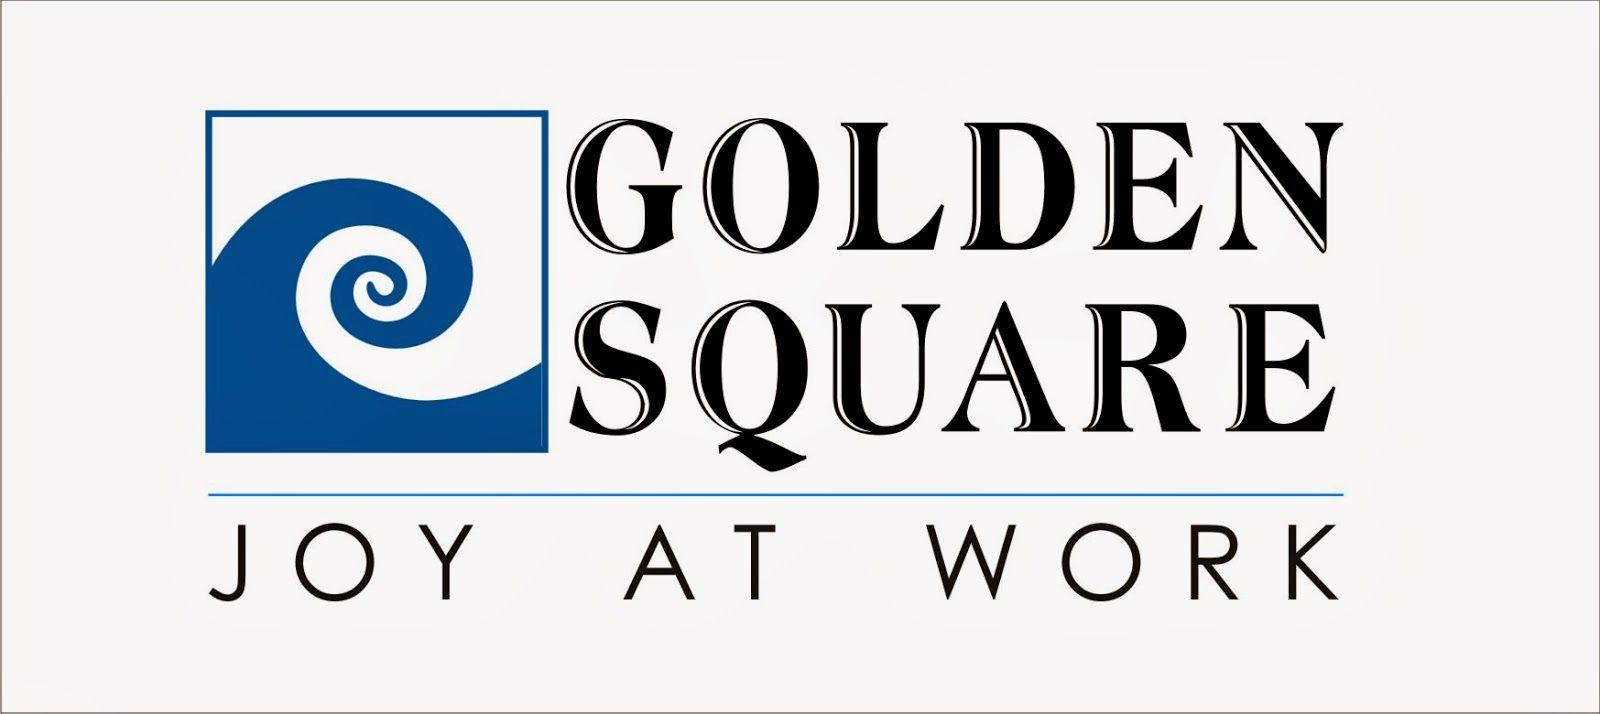 Blue and Gold Square Logo - Why no Gold colour in Golden Square Logo?